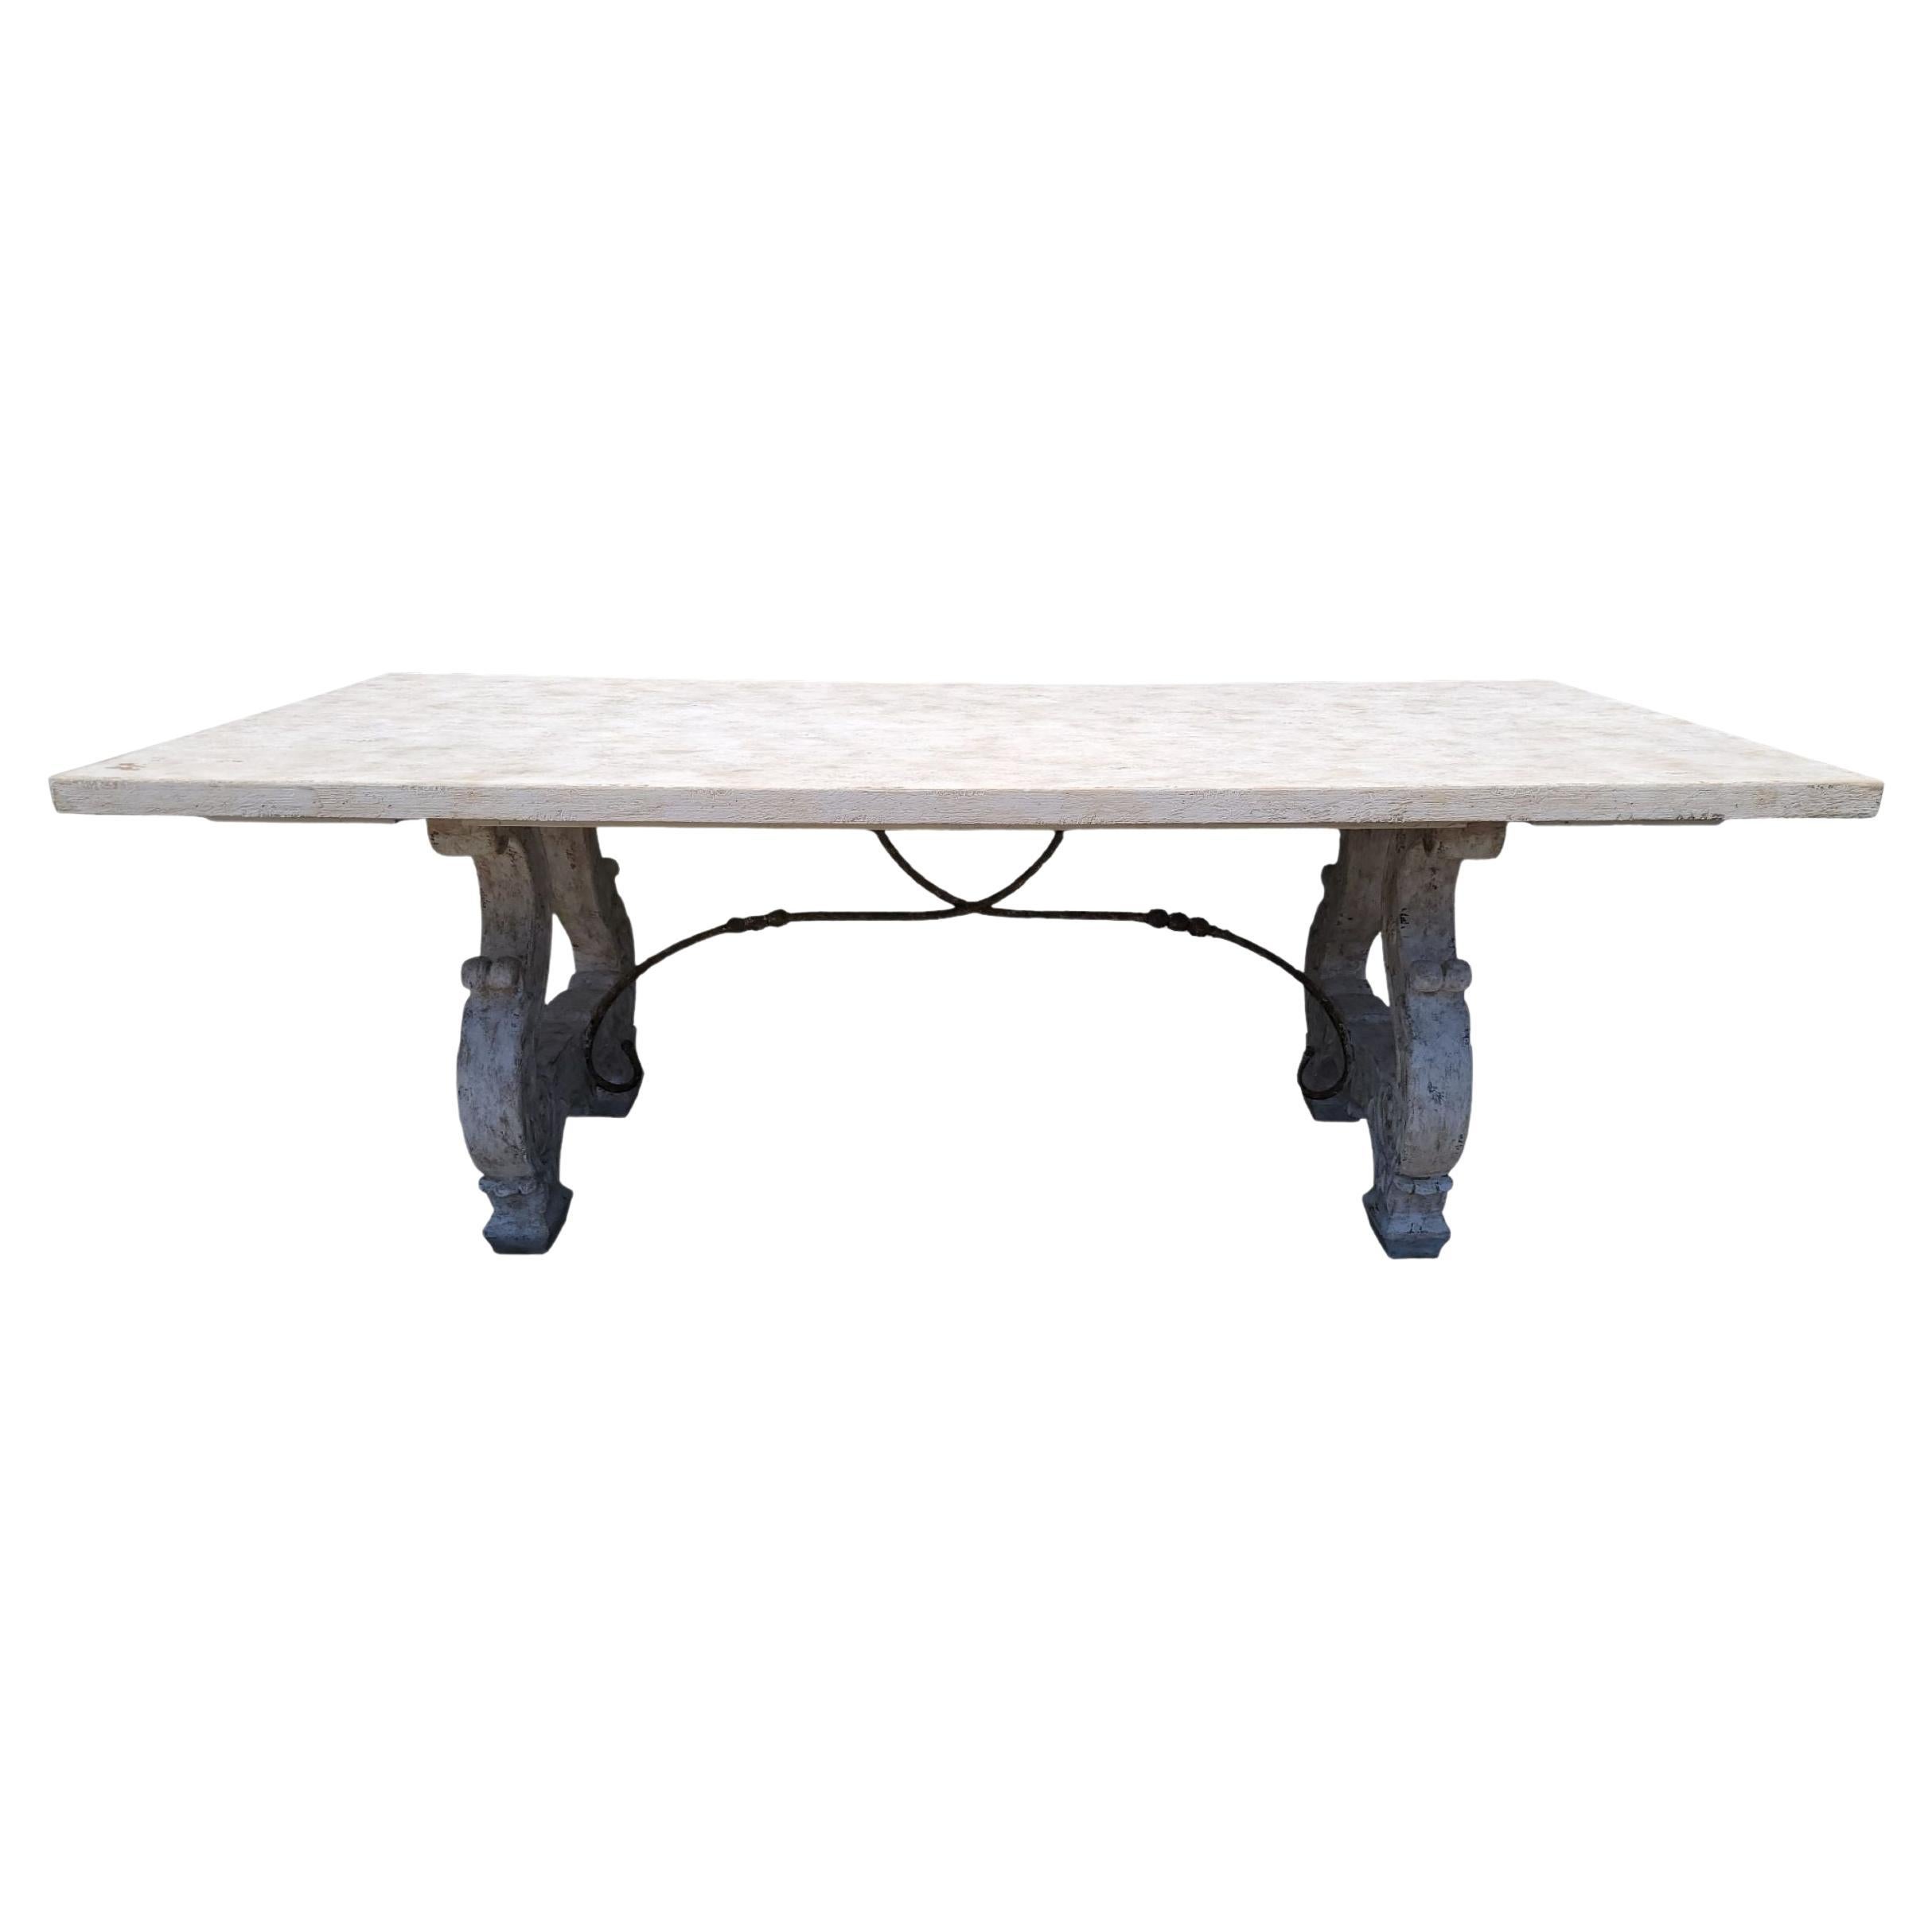 Vintage Spanish Colonial Bleach Oak Wood Painted Dinning Table wIron Stretchers For Sale